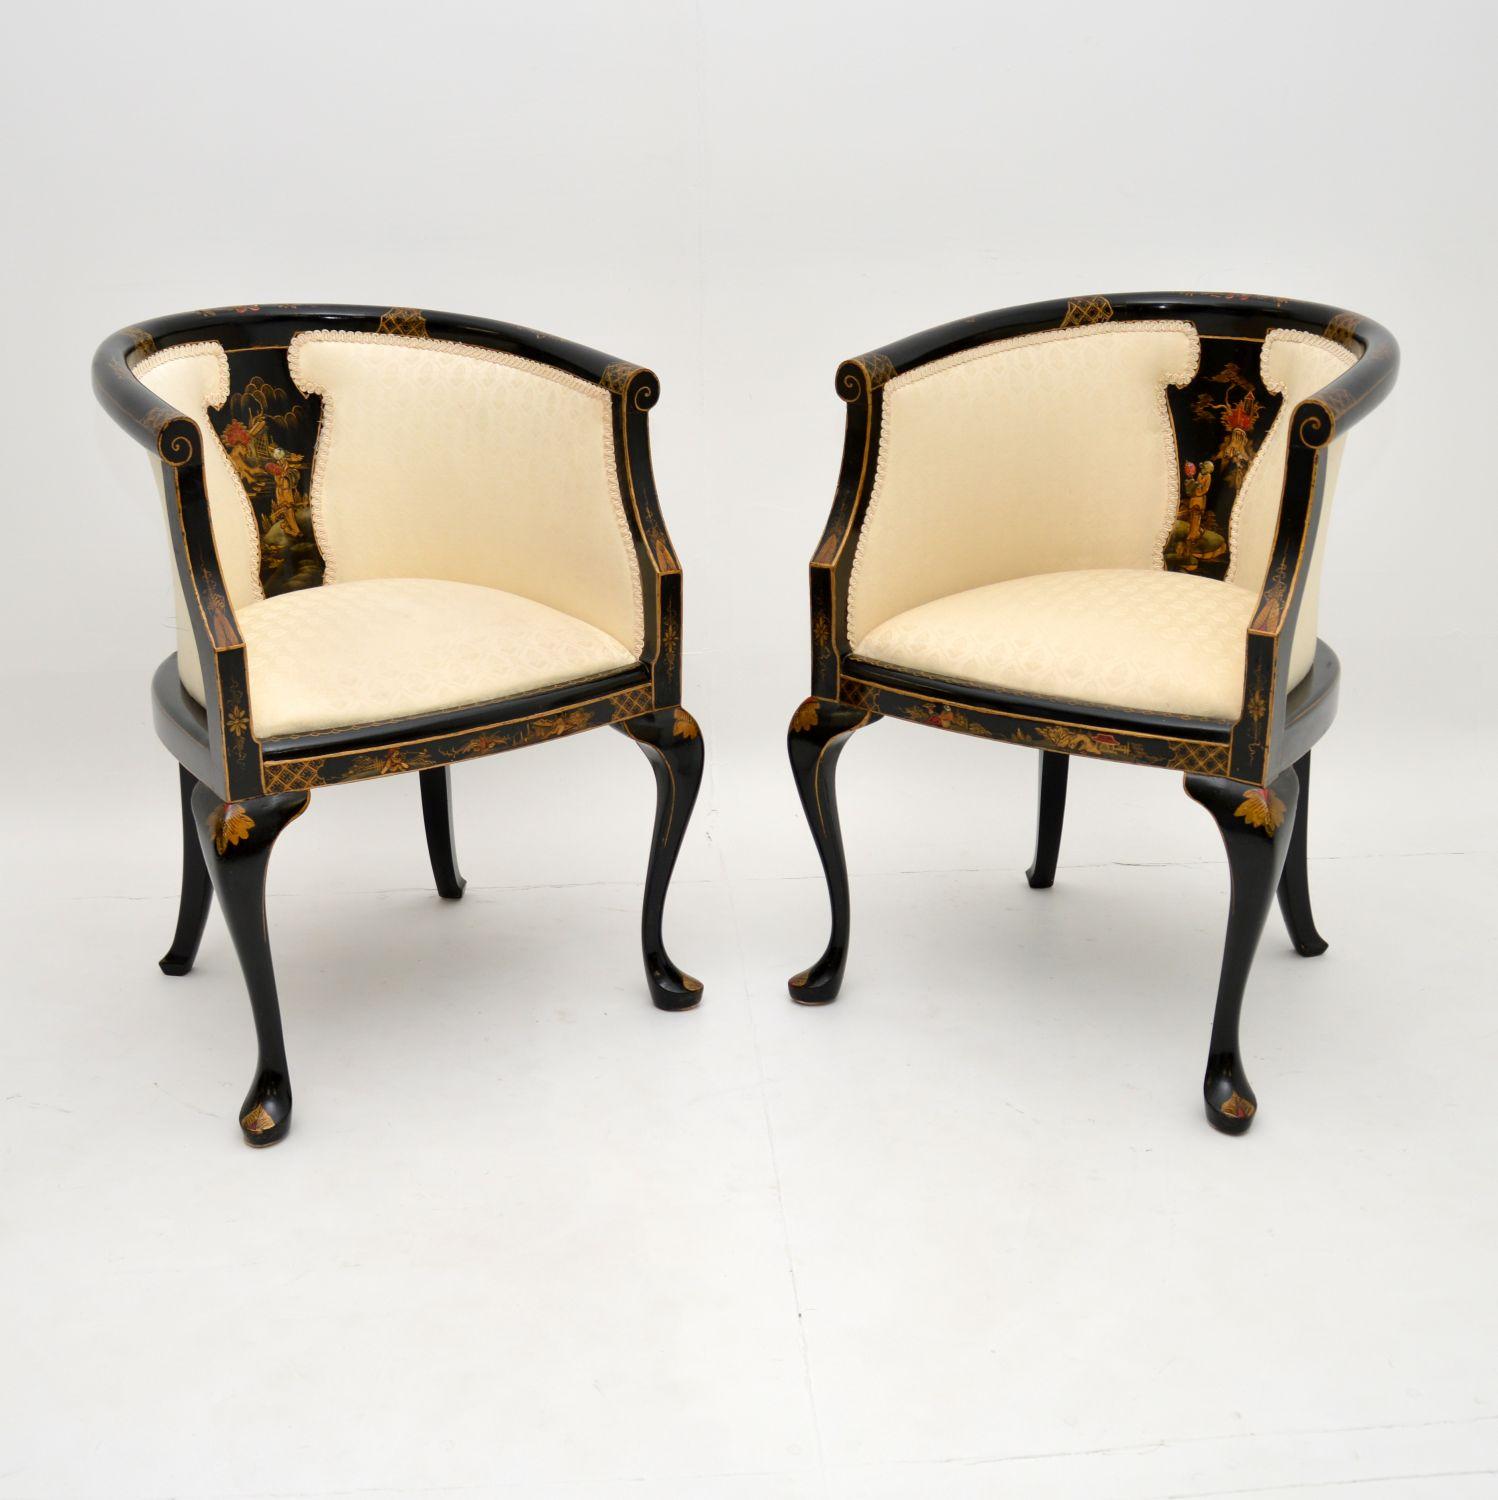 A gorgeous pair of antique lacquered chinoiserie tub armchairs. These were made in England & they date from the 1920’s period.

The quality is amazing, these are very well built and sturdy. They have stunning lacquered chinoiserie designs